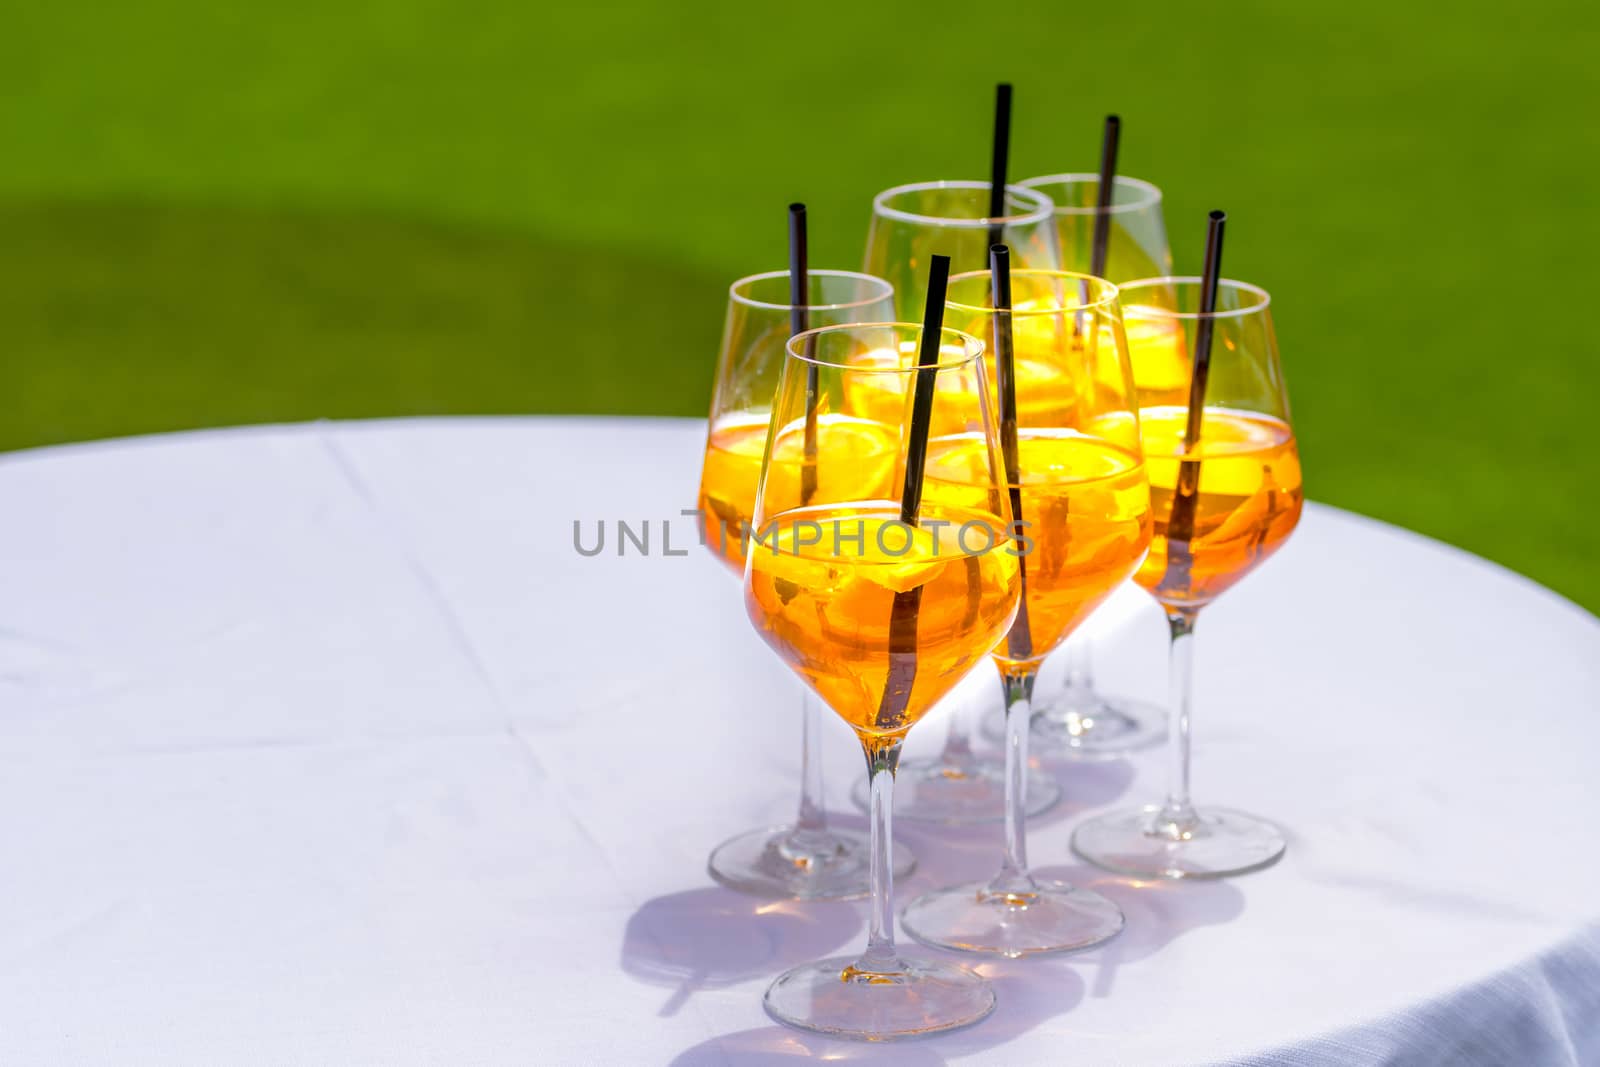 Popular Italian aperitif made with prosecco, orange bitter and soda, decorated with orange slices.Several glasses on white table with green background.